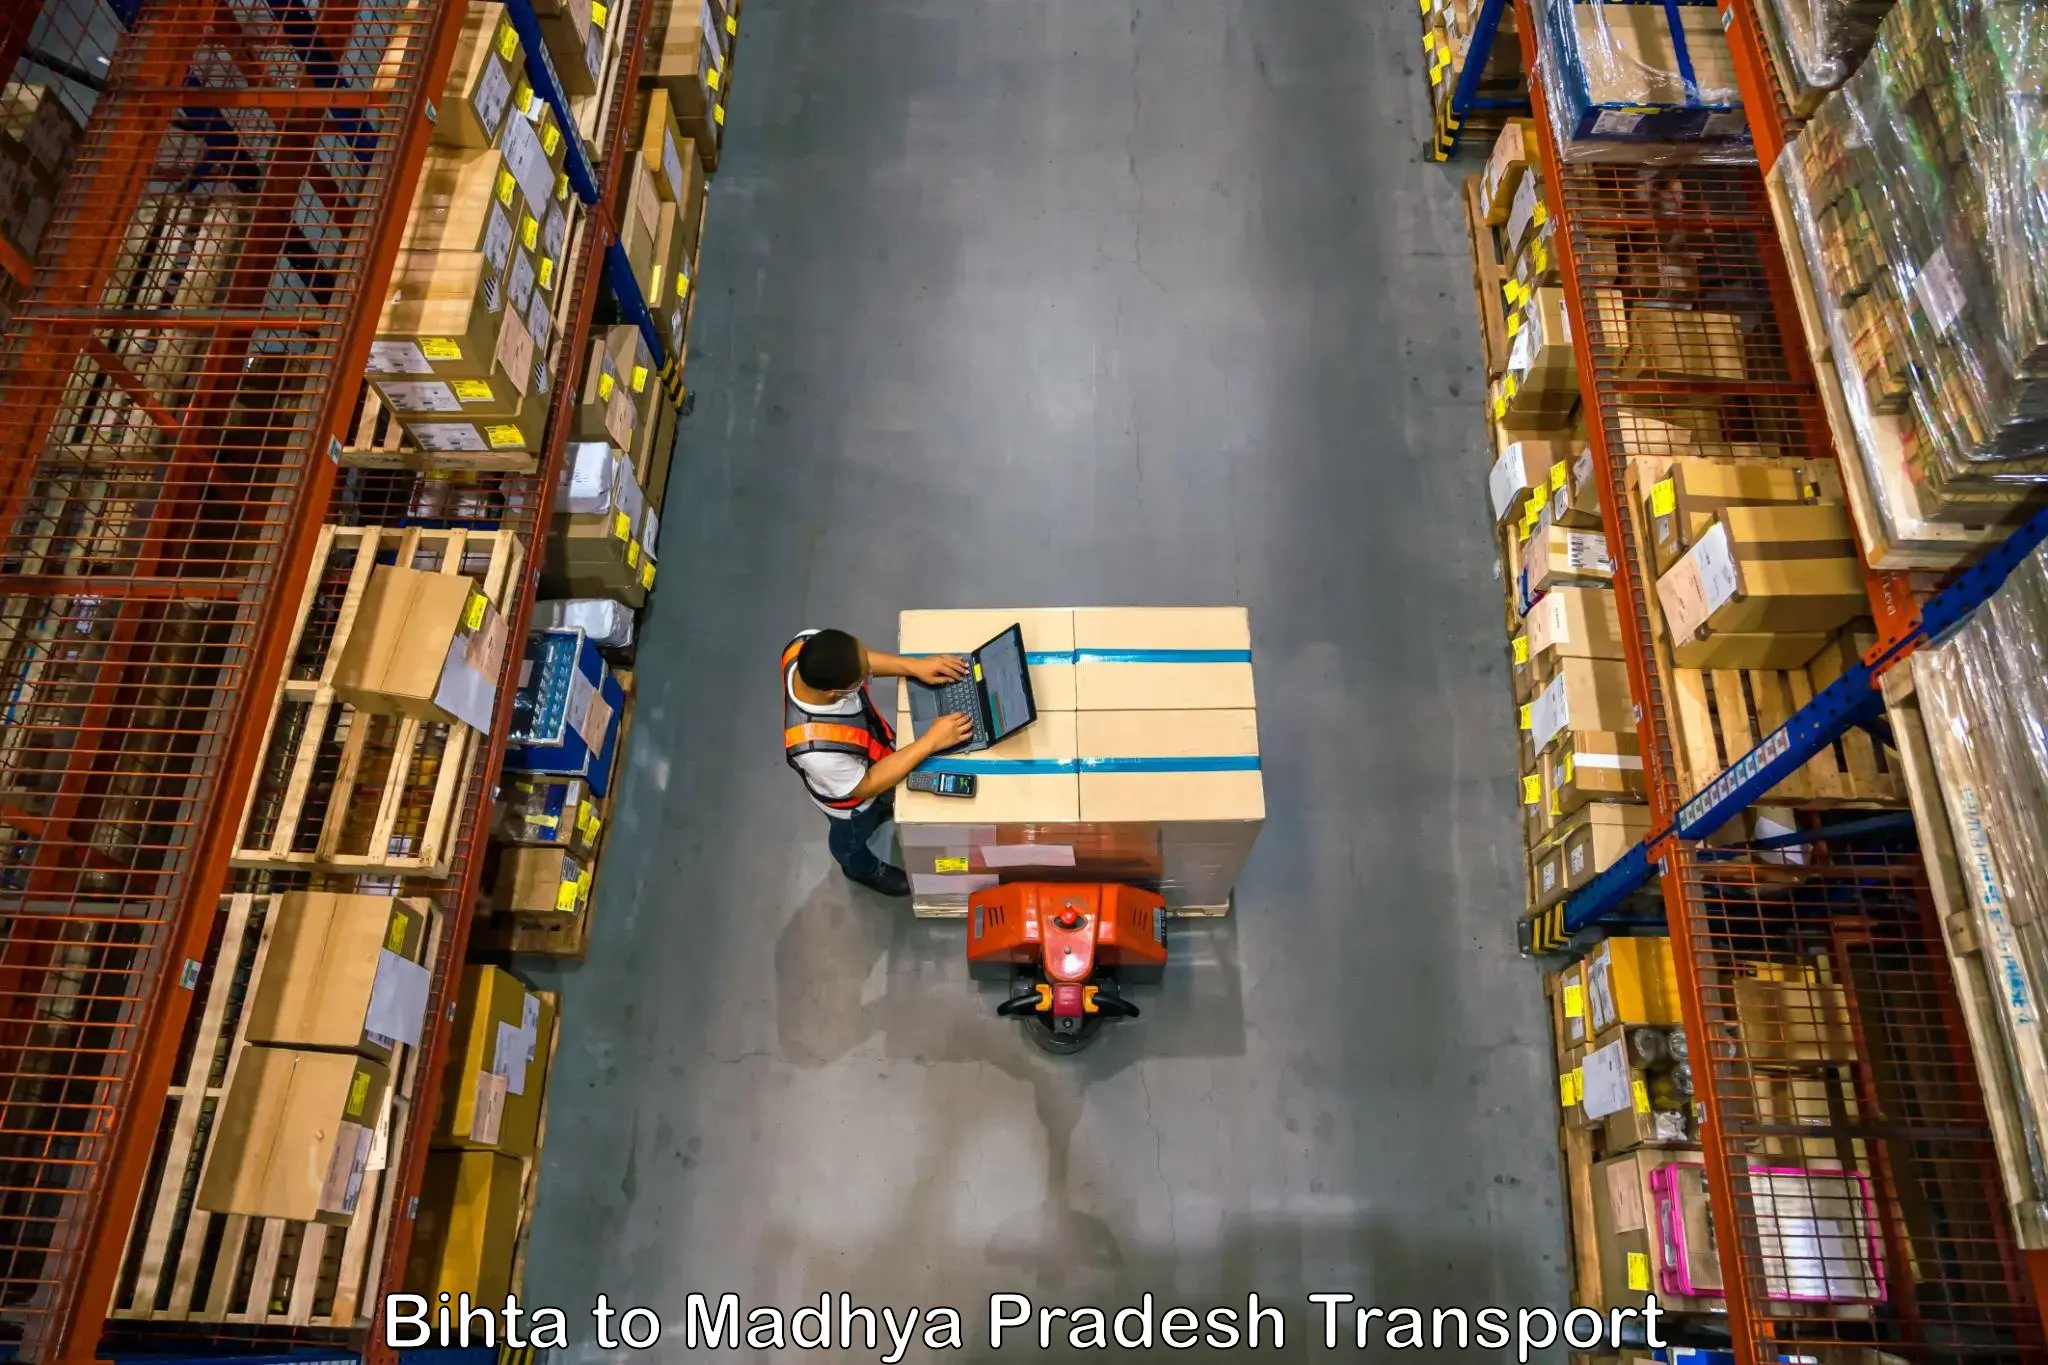 Air cargo transport services in Bihta to Nagda